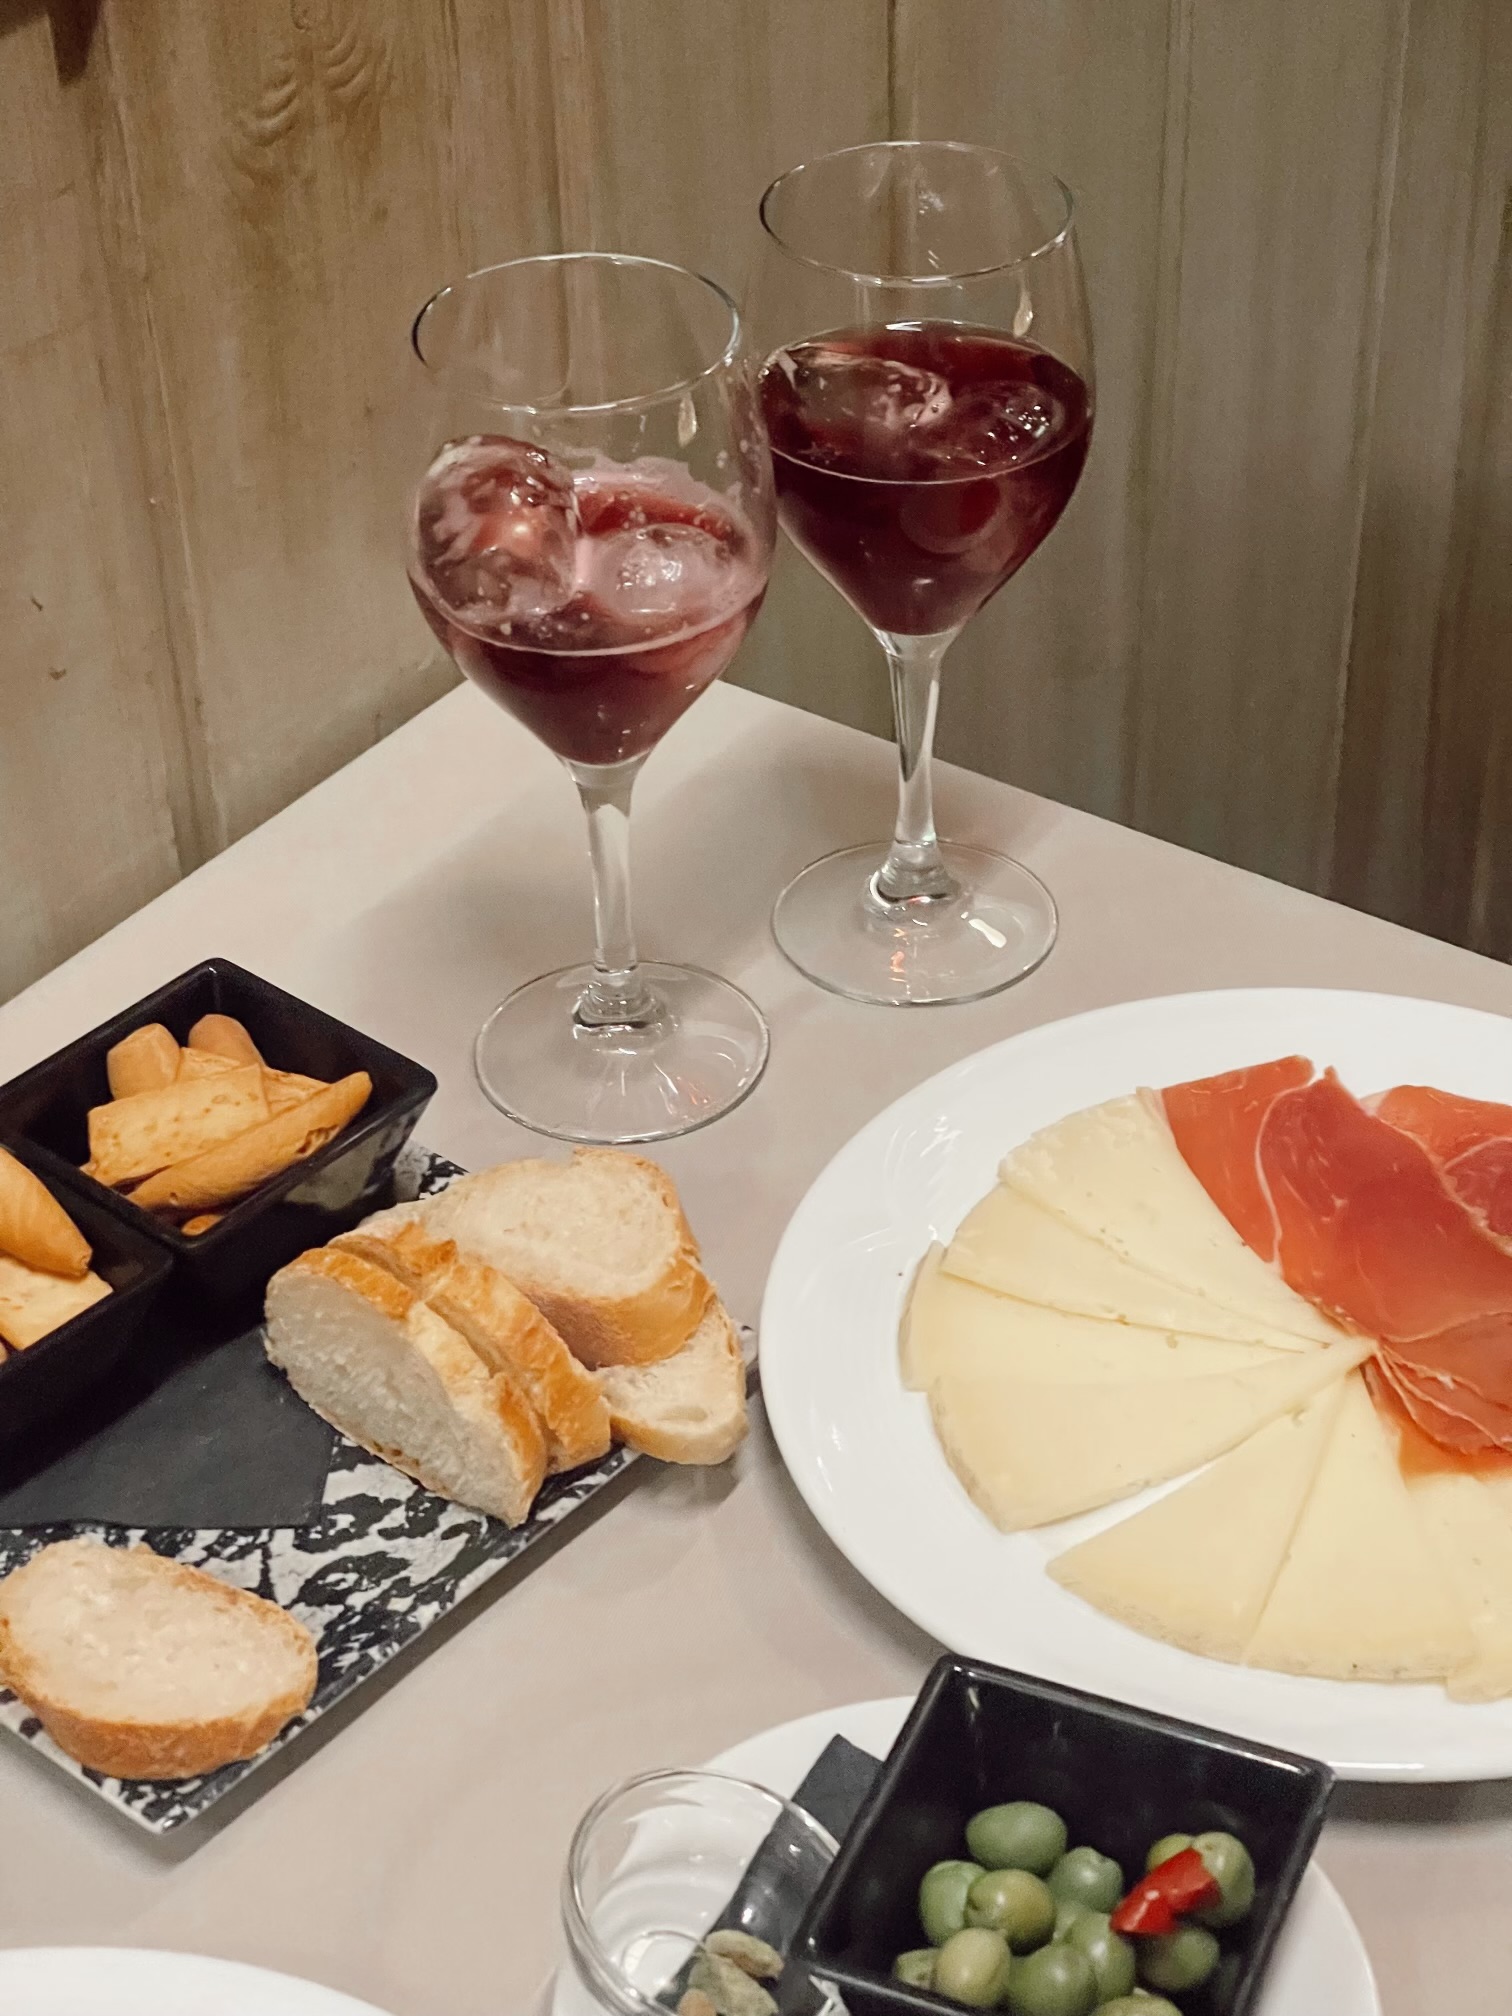 A picture of a table with cheese, ham, bread, and wine glasses on it.